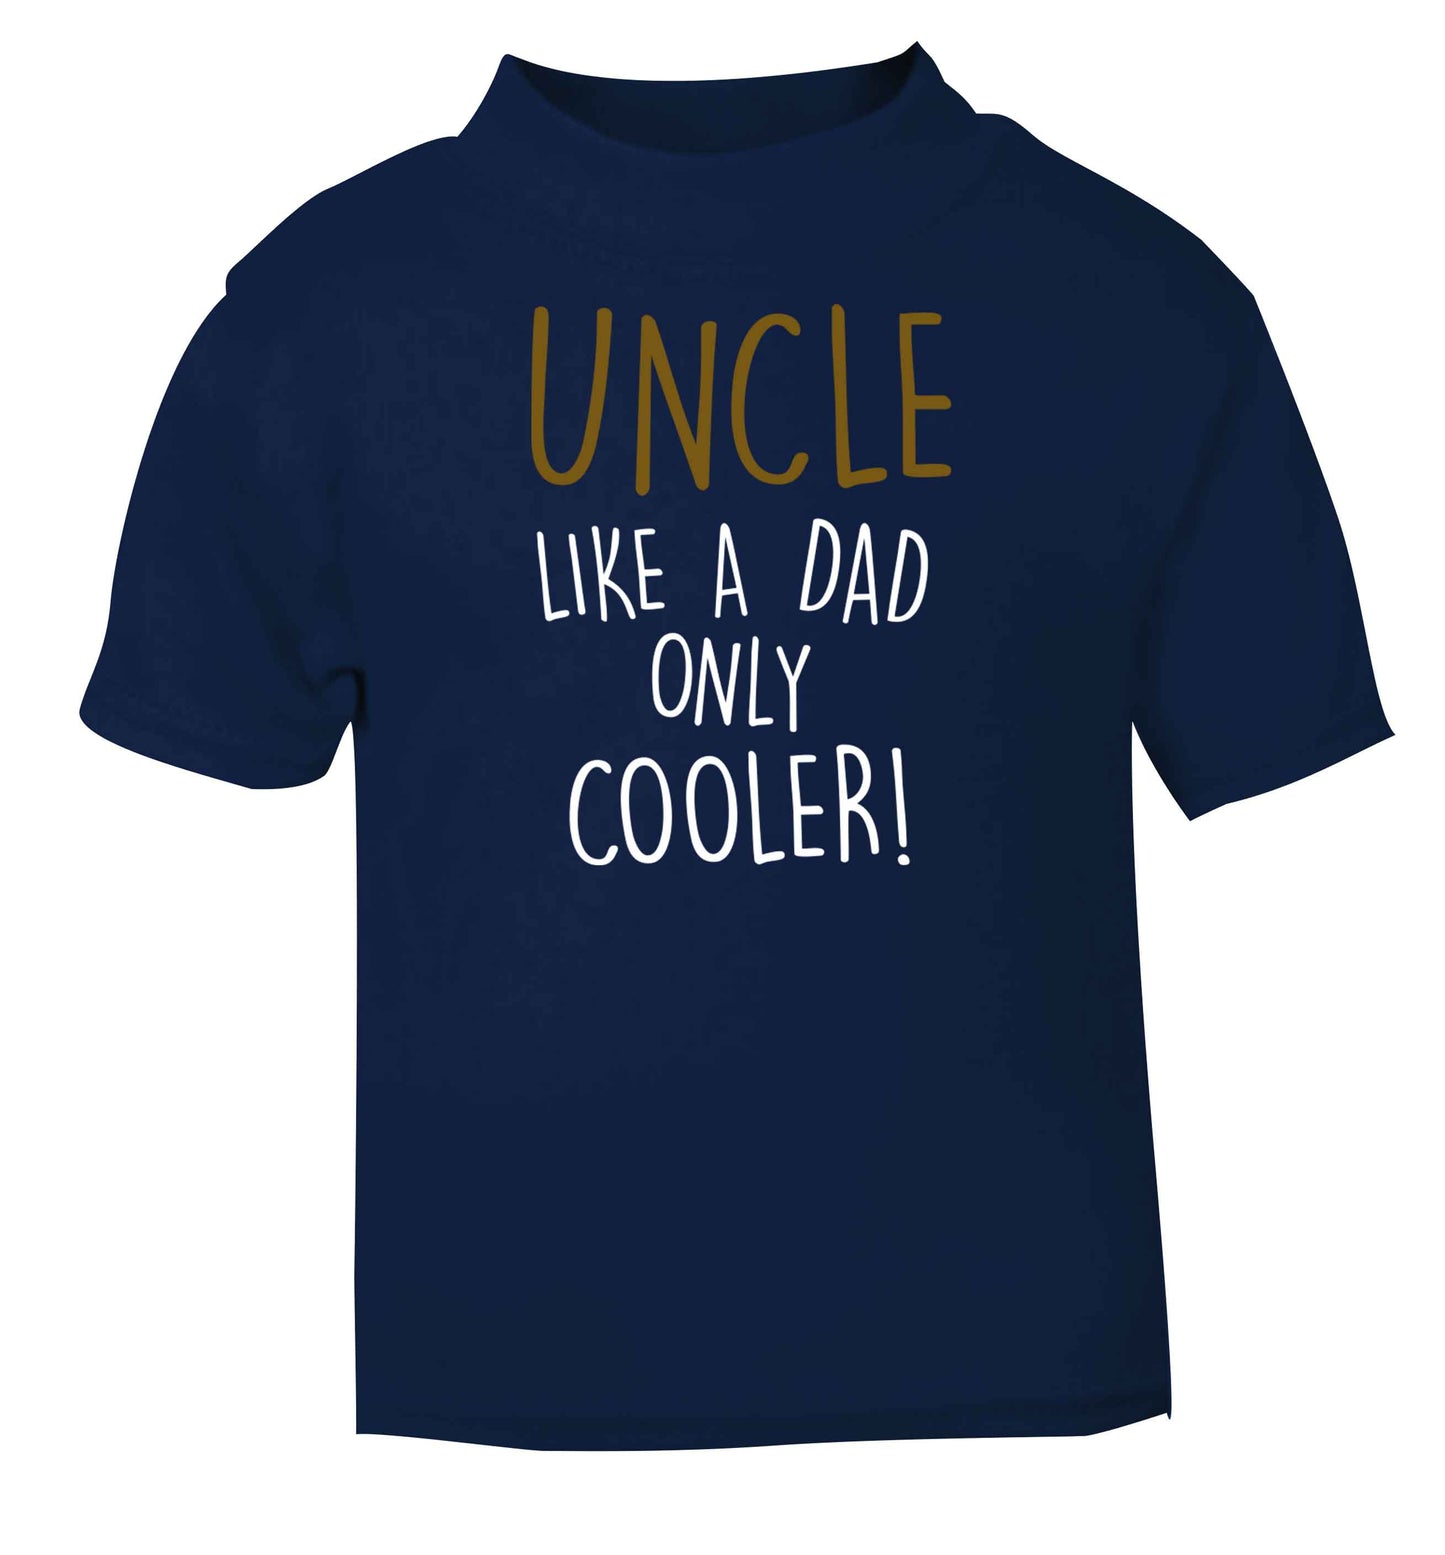 Uncle like a dad only cooler navy baby toddler Tshirt 2 Years